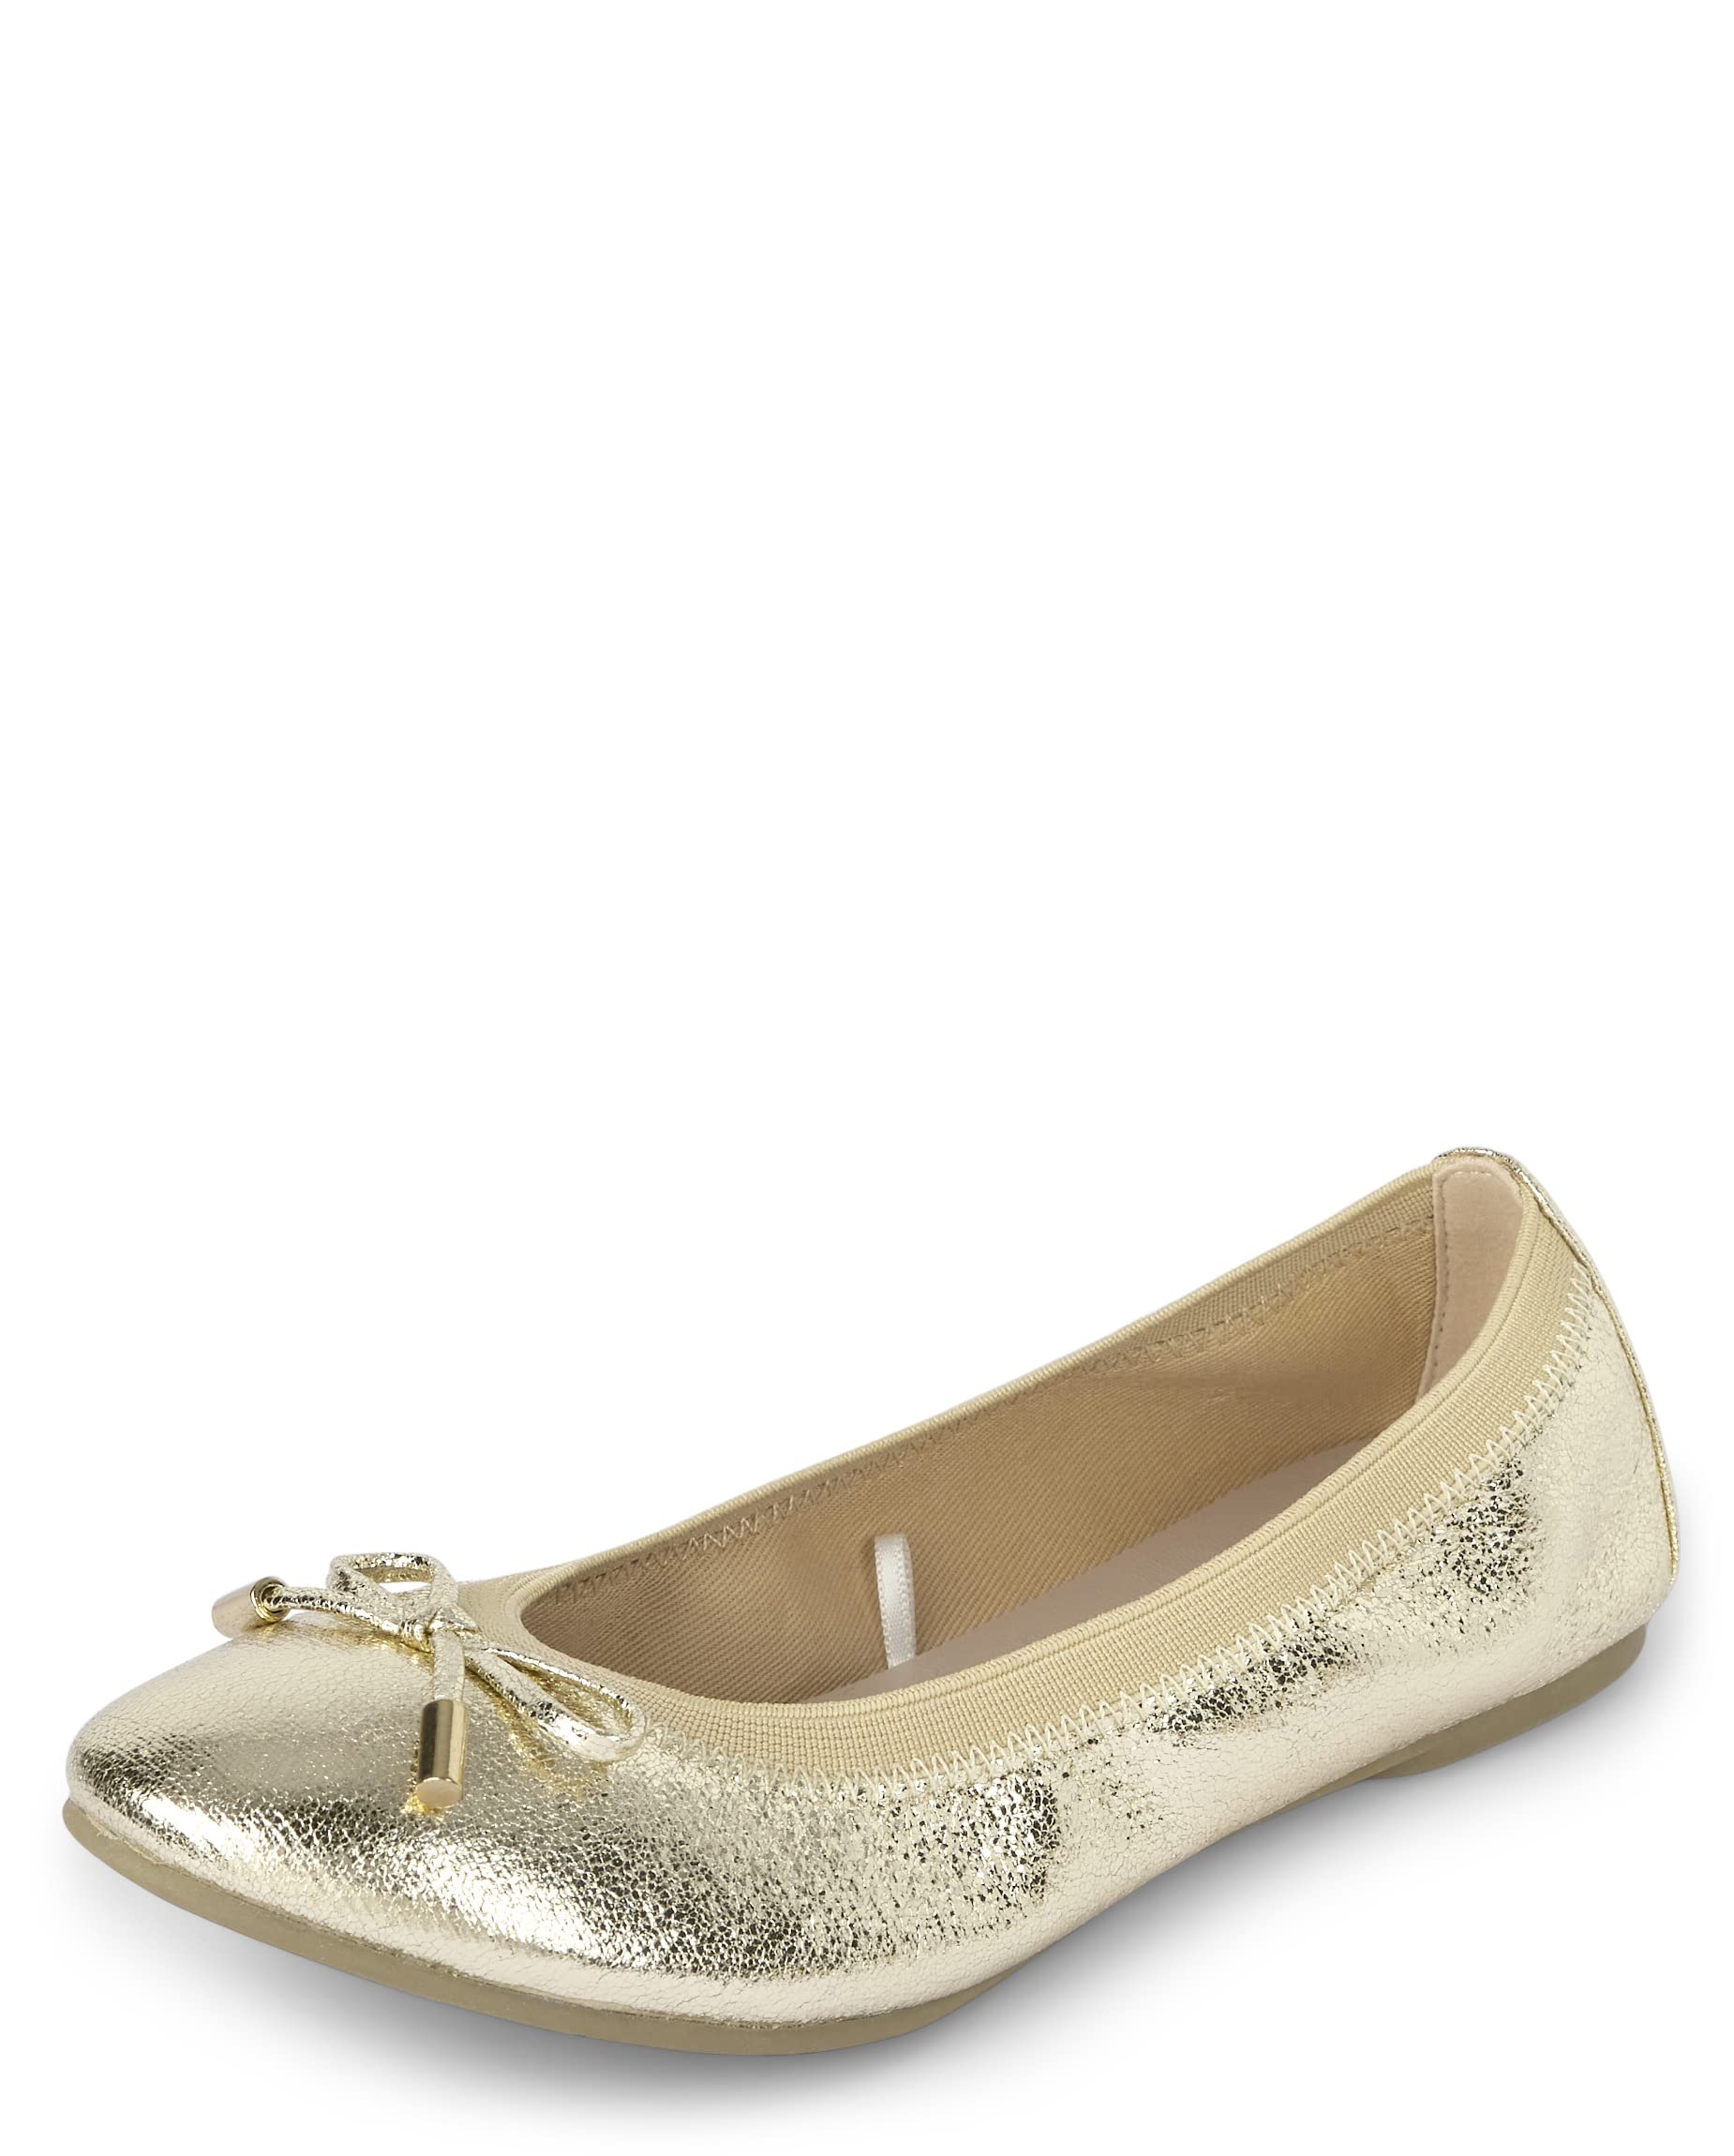 The Children's Place Girls Closed Toe Ballet Flats